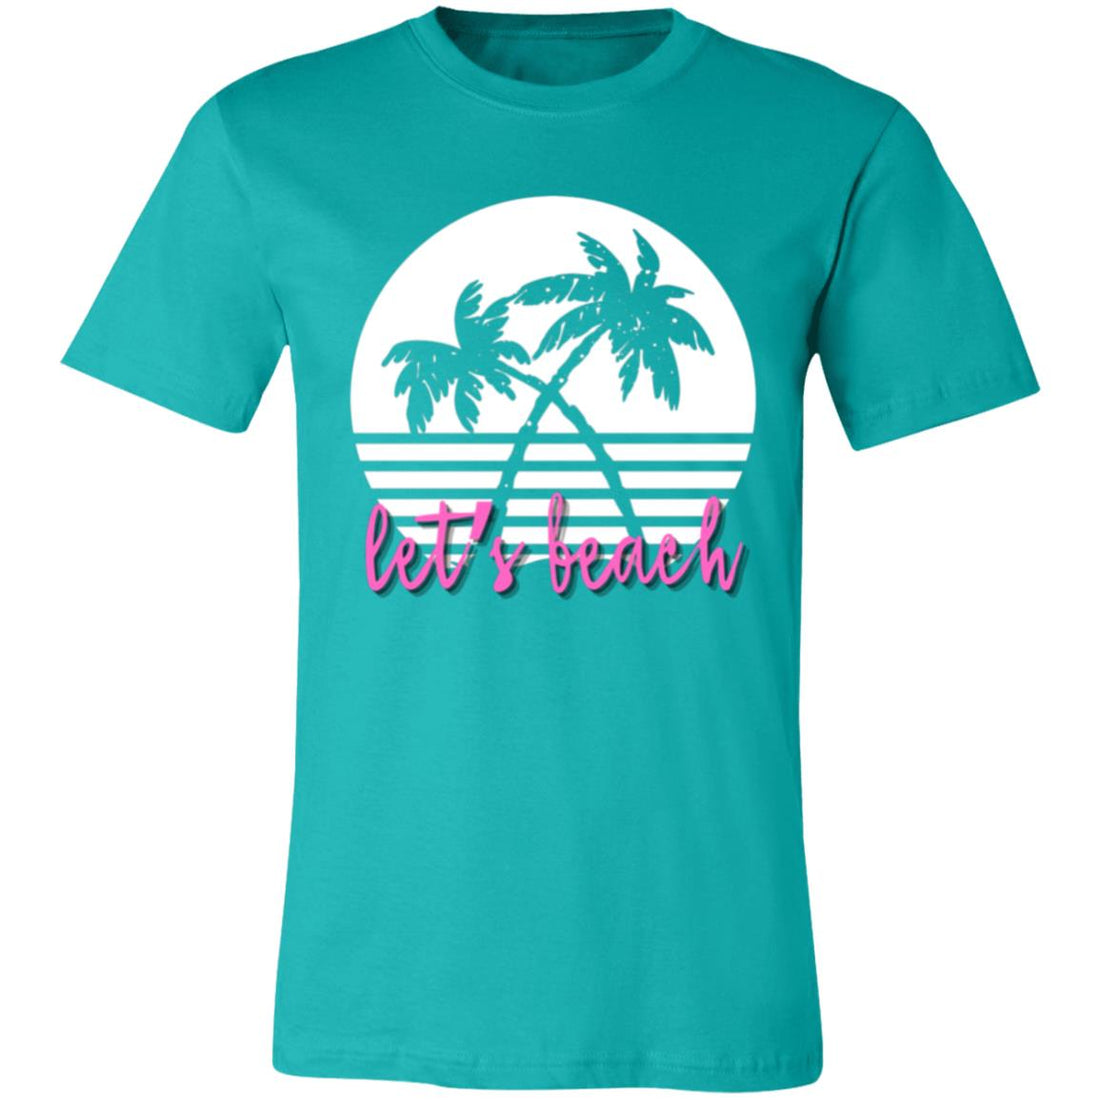 Let's Beach T-Shirt - T-Shirts - Positively Sassy - Let's Beach T-Shirt